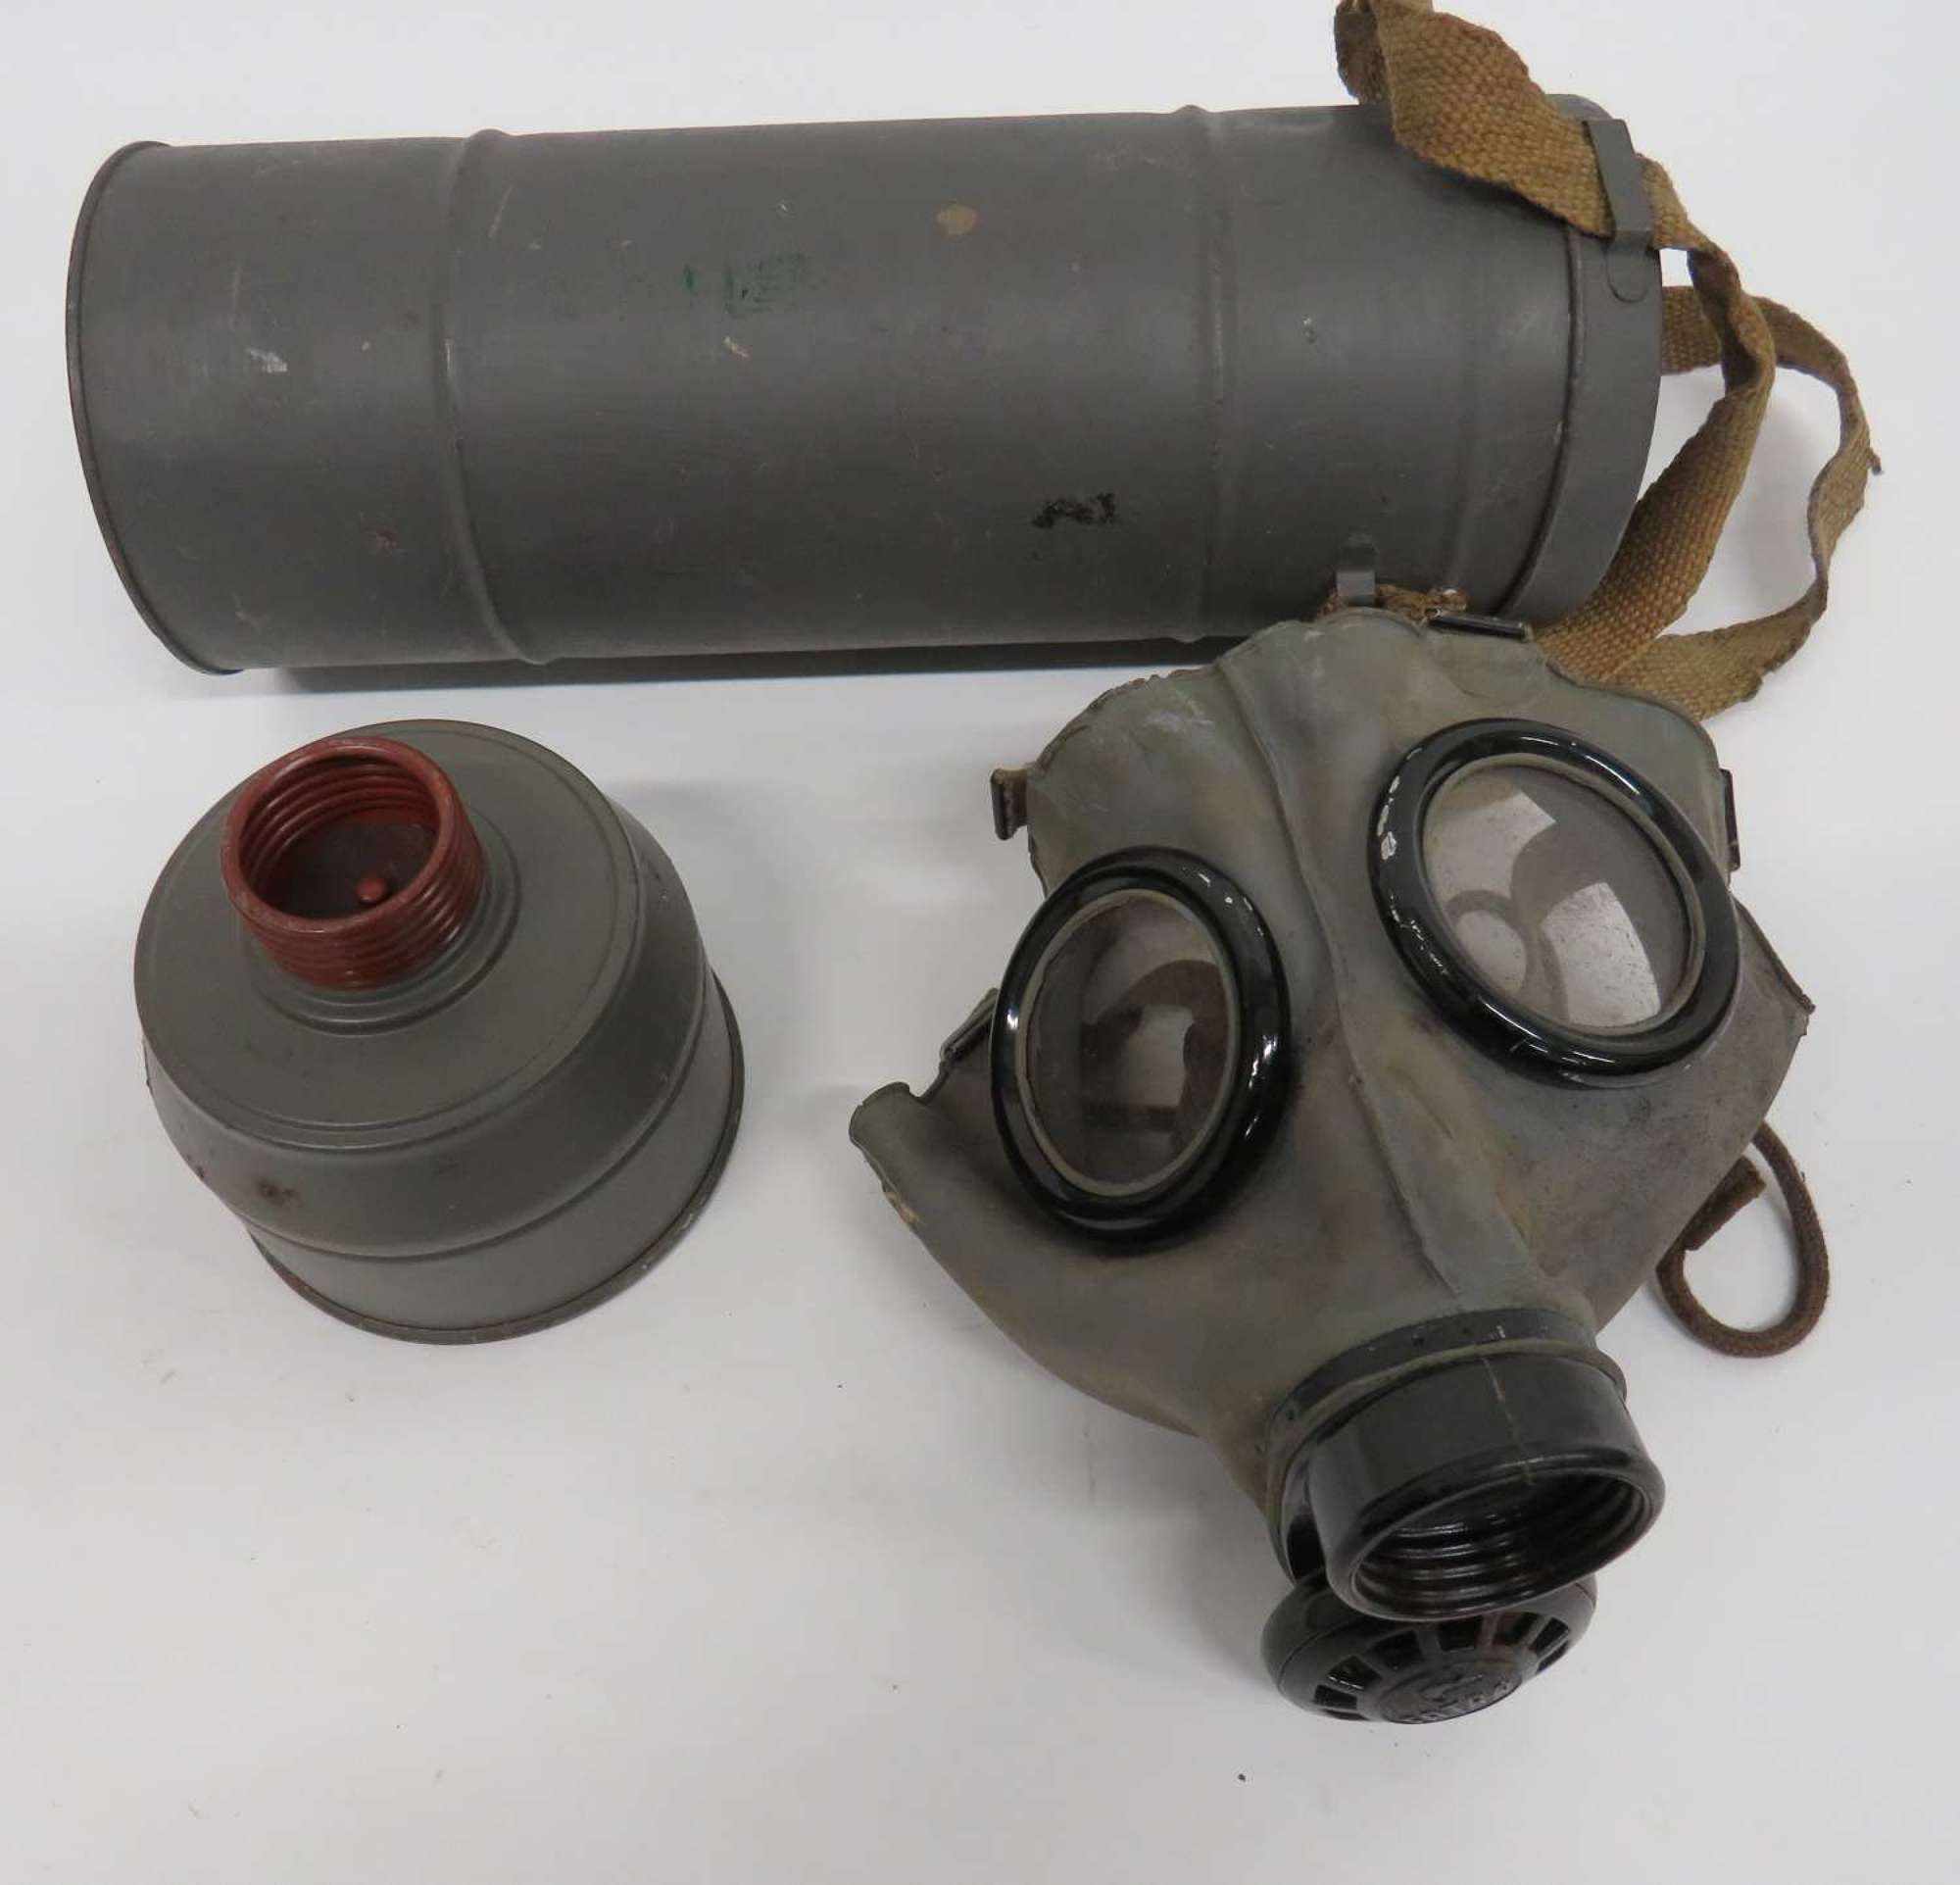 1939 Dated Czech Respirator as used by German Forces